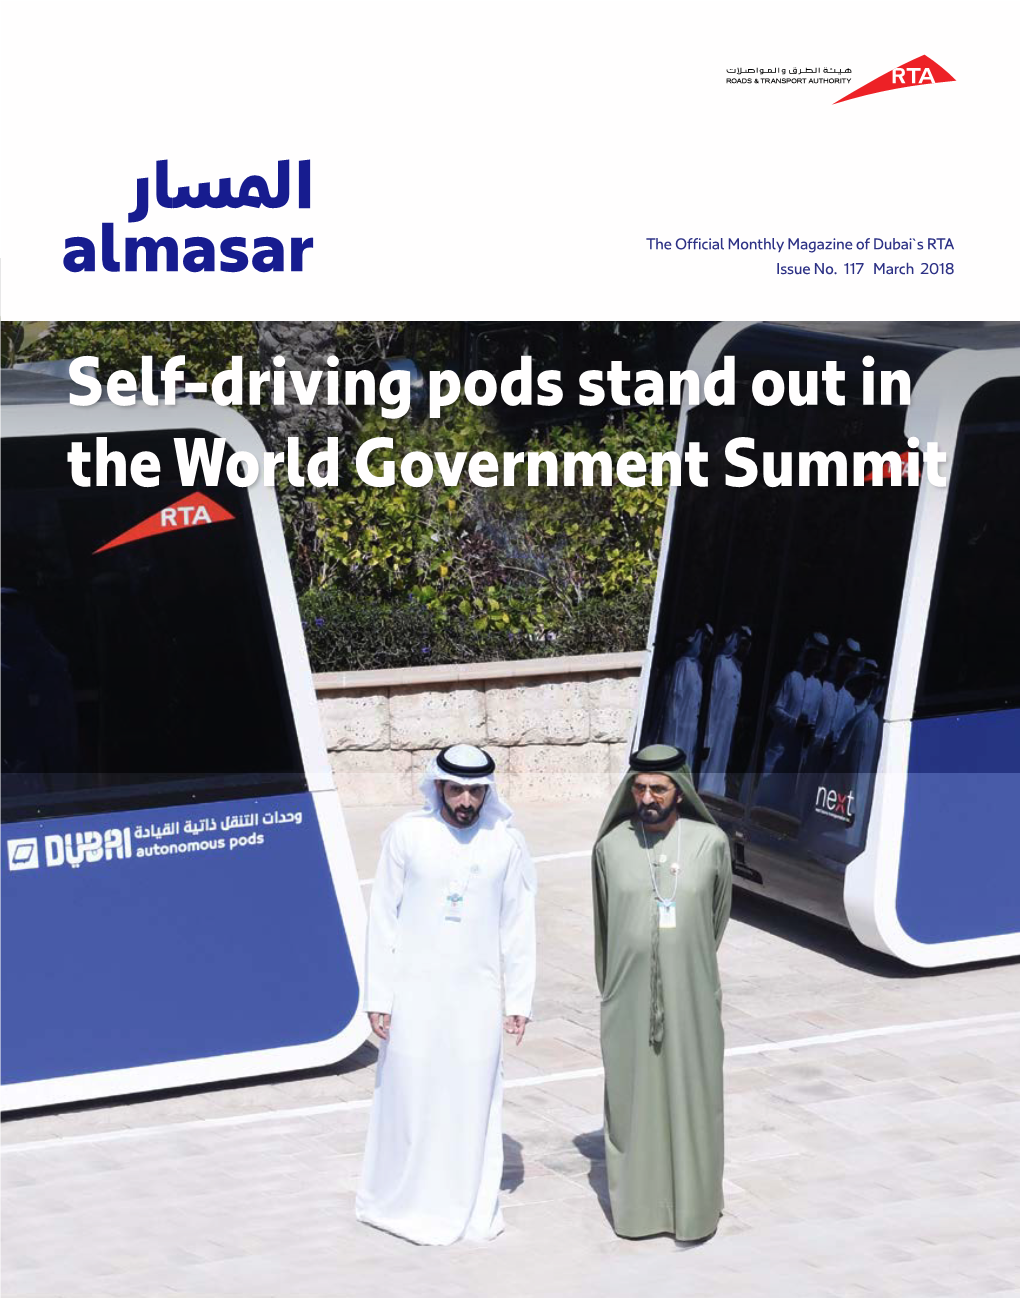 Self-Driving Pods Stand out in the World Government Summit Vision Mission